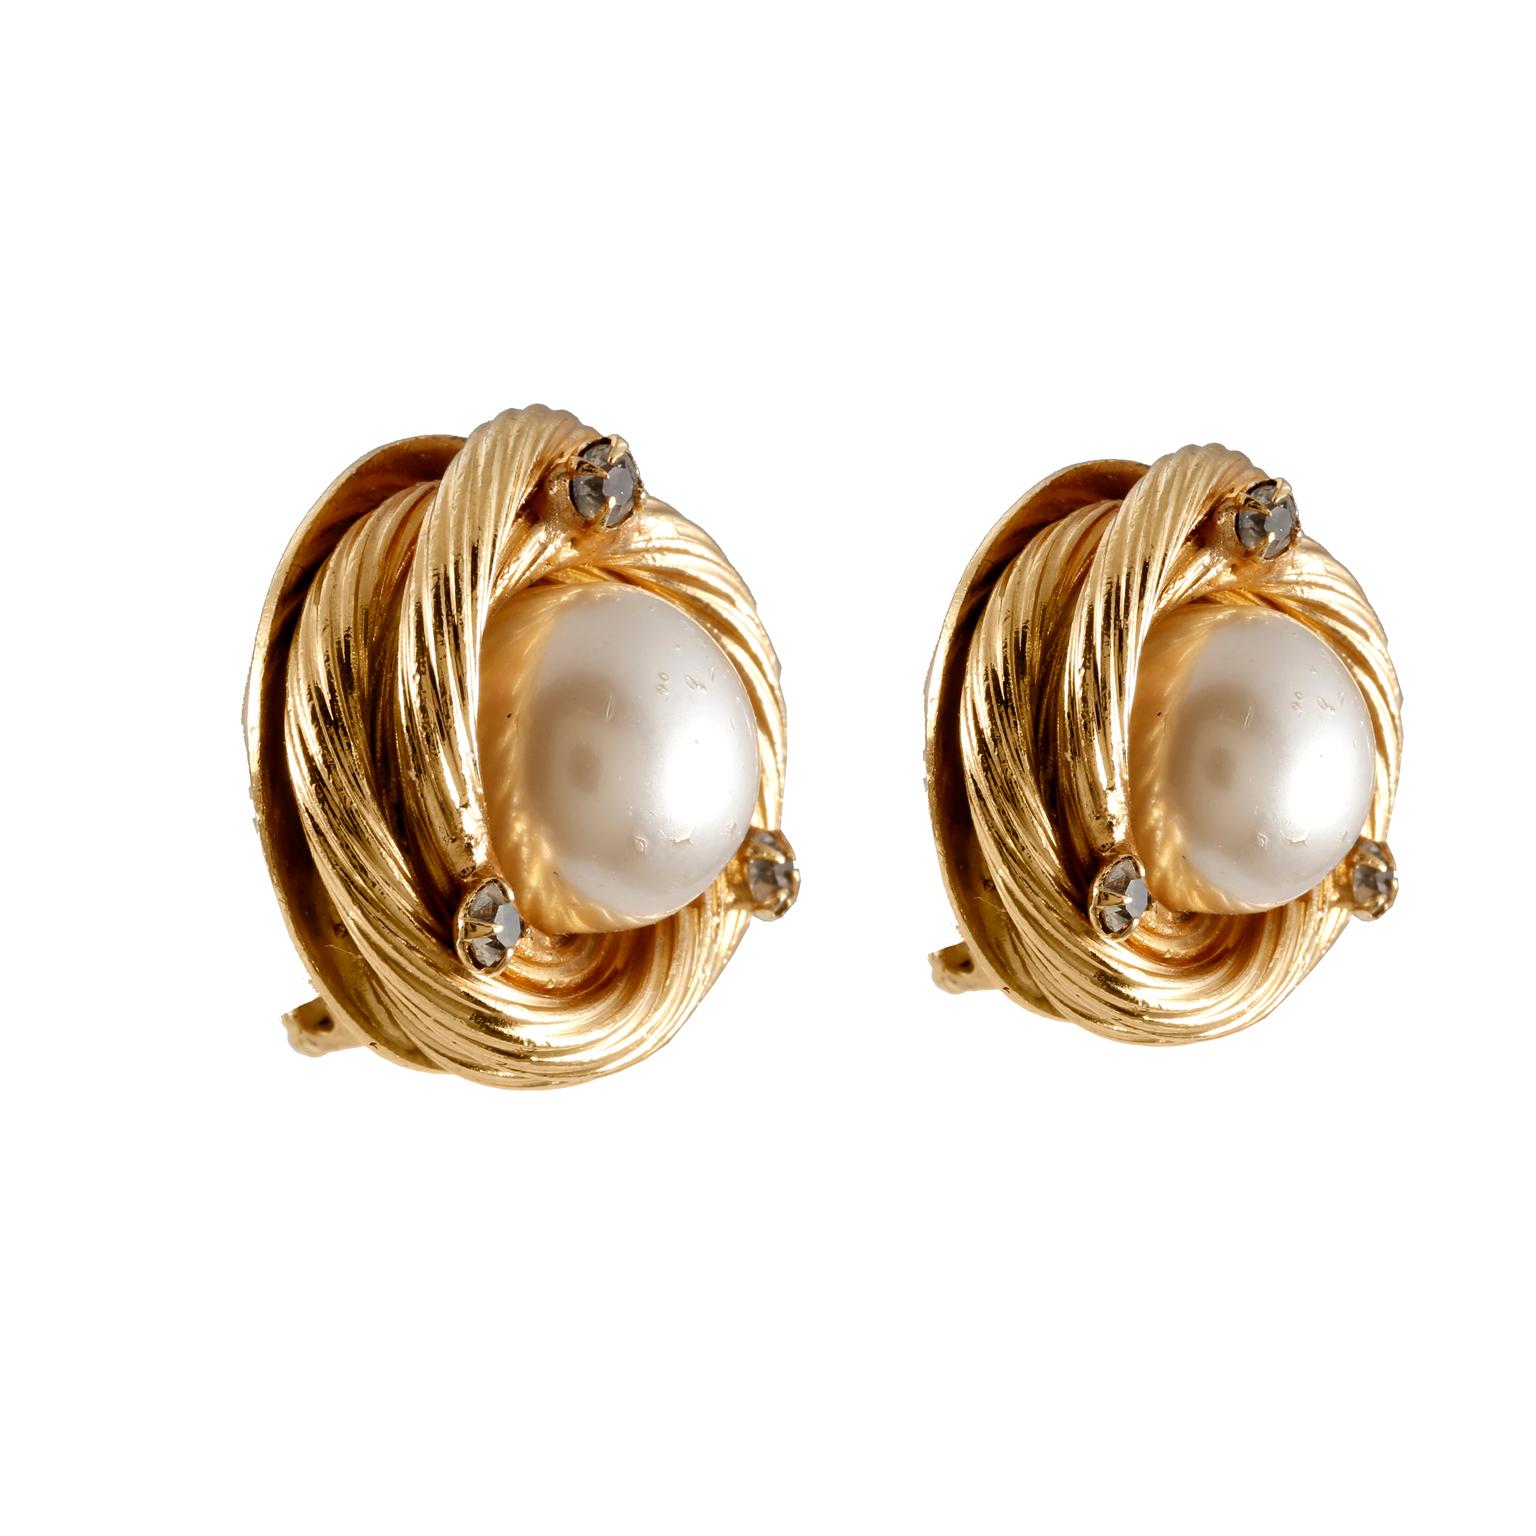 These authentic Chanel Pearl and Crystal Gold Knot Earrings are in very good condition from the Spring 1993 collection.  Large faux pearls are centered within a swirling gold tone surround.  Three small crystals embellish each earring.  Clip on